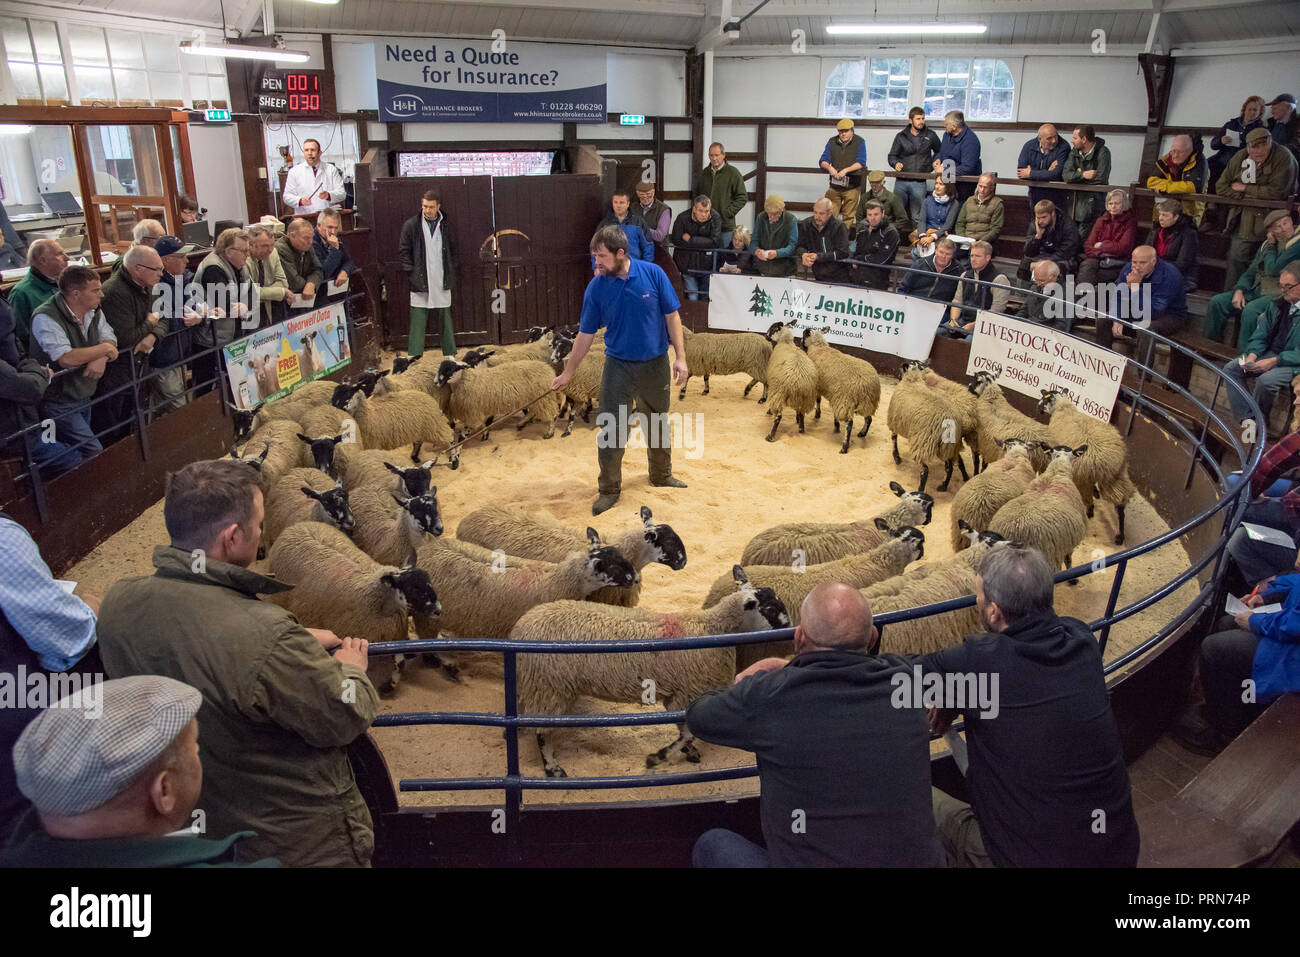 Cumbria, UK. 3rd Oct 2018. The harvest of the fells. The Alston Moor sale of over 18,000 Mule lambs, which will be used for breeding, at Lazonby Livestock Market, Cumbria. Credit: John Eveson/Alamy Live News Stock Photo